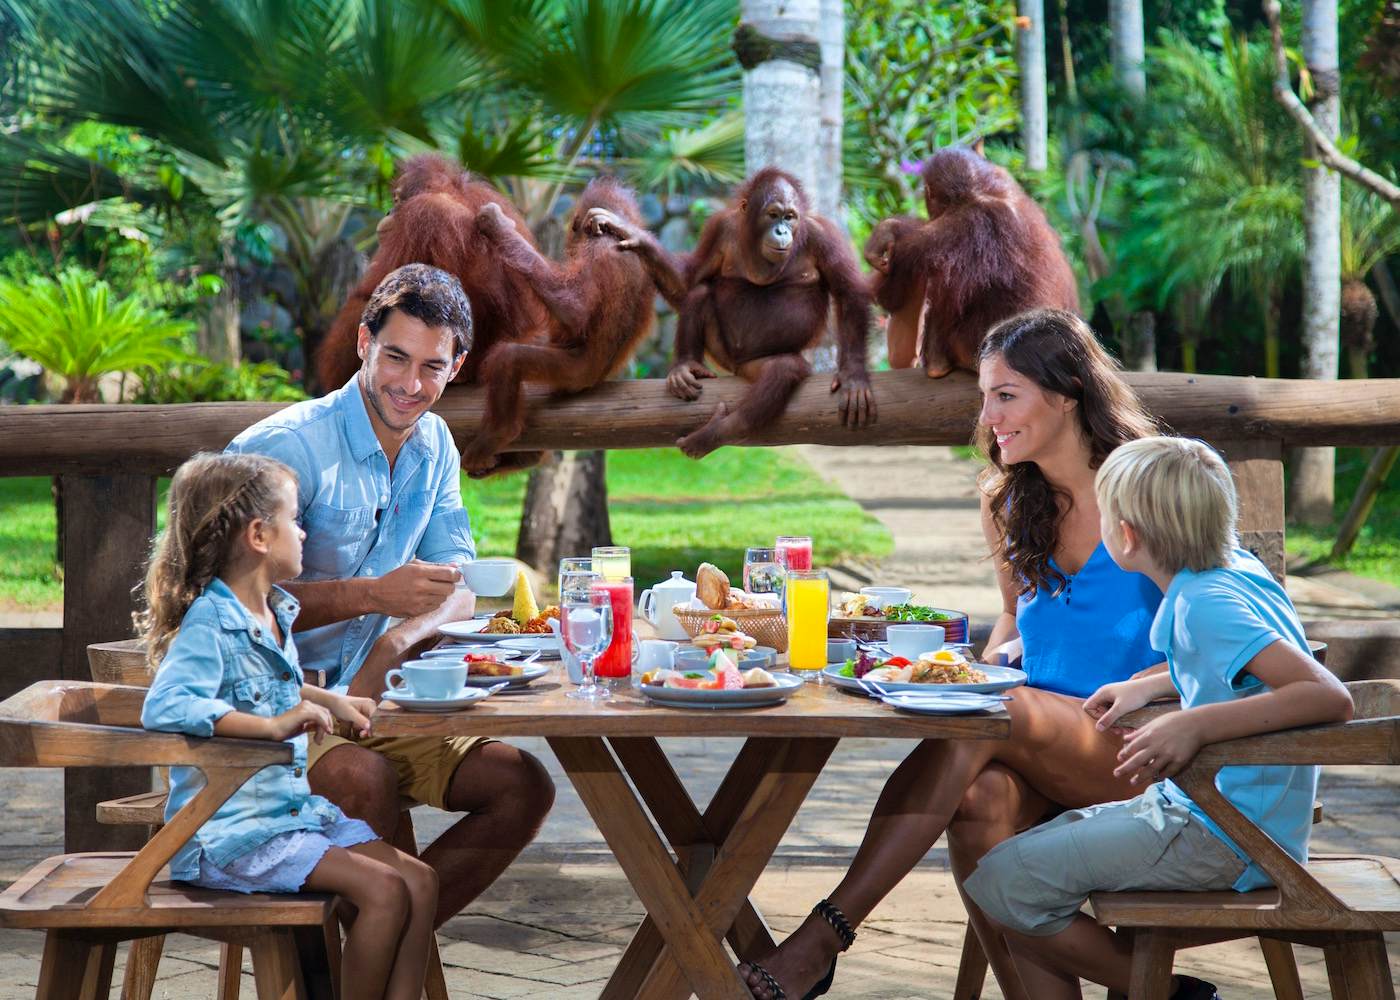 Bali Zoo: Breakfast with the Orangutans - Admission only